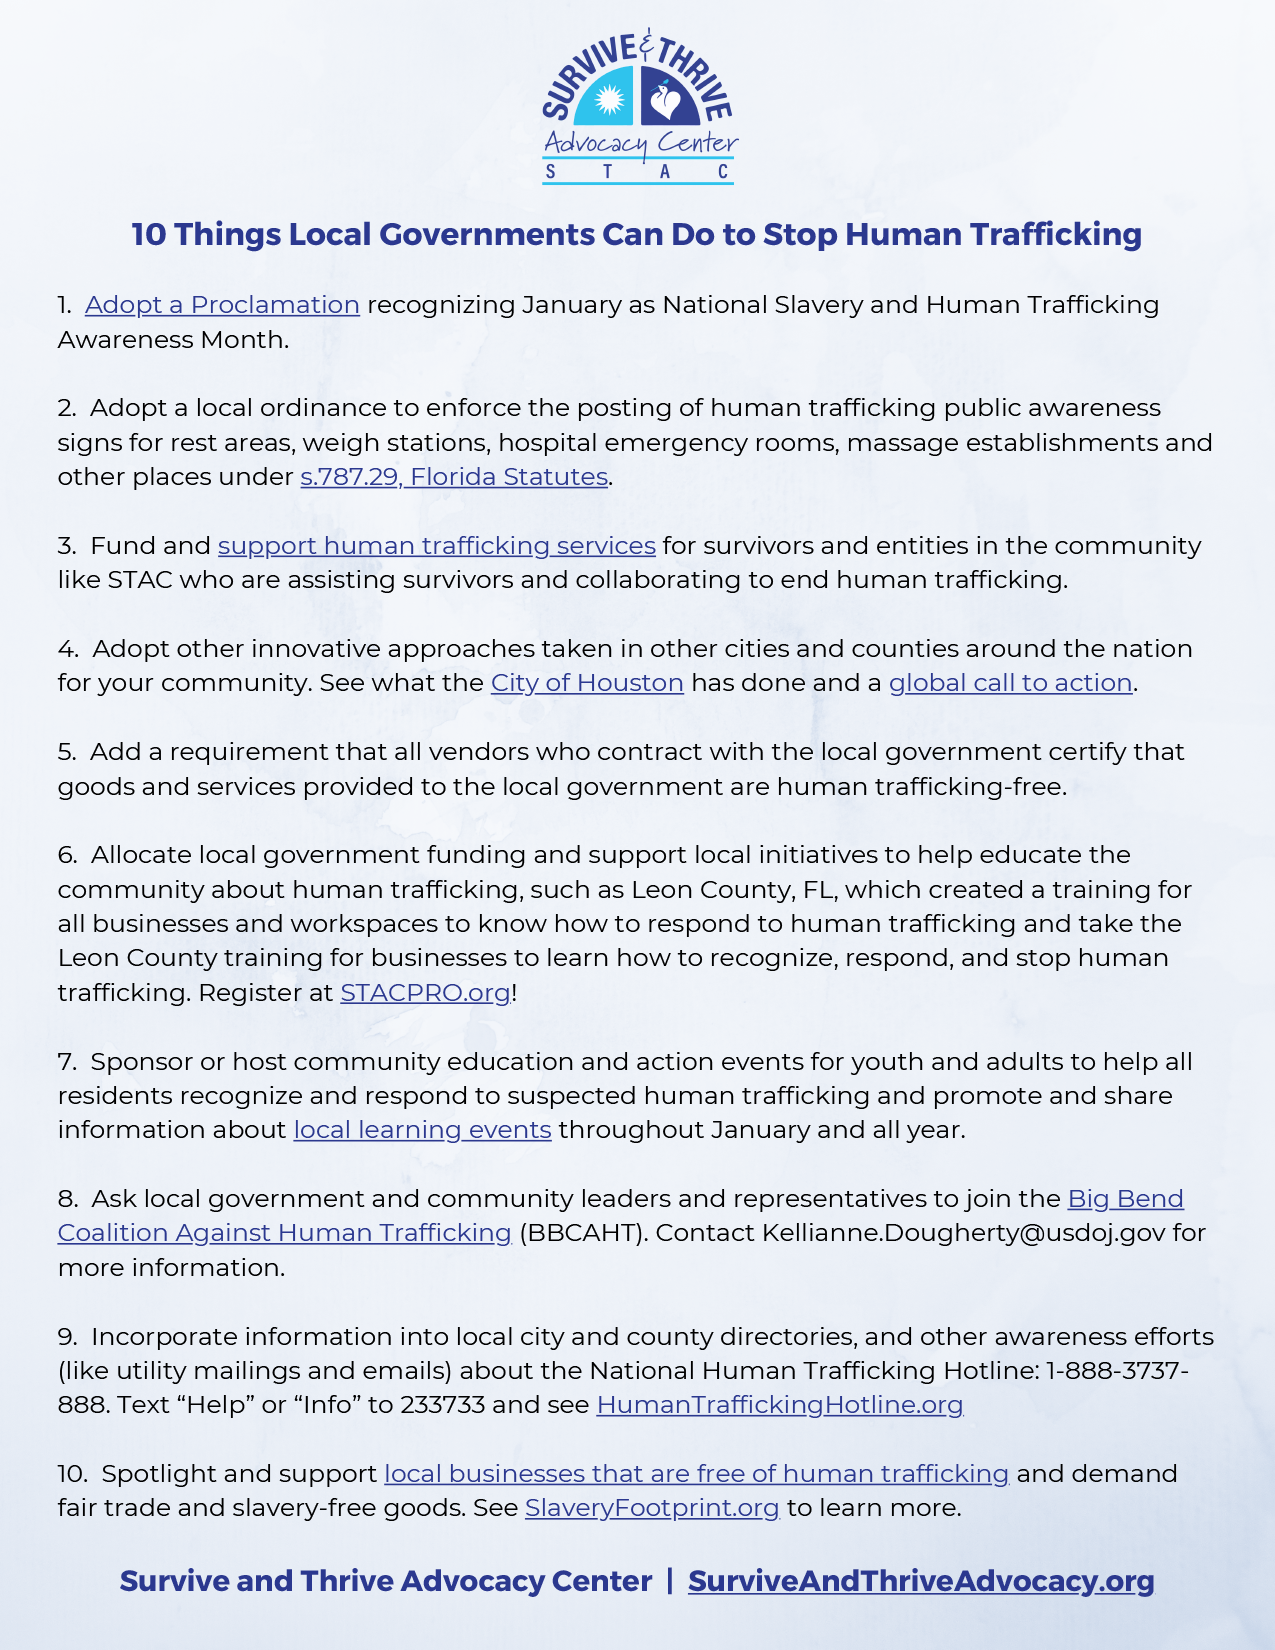 10 Things Local Governments Can Do to Stop Human Trafficking